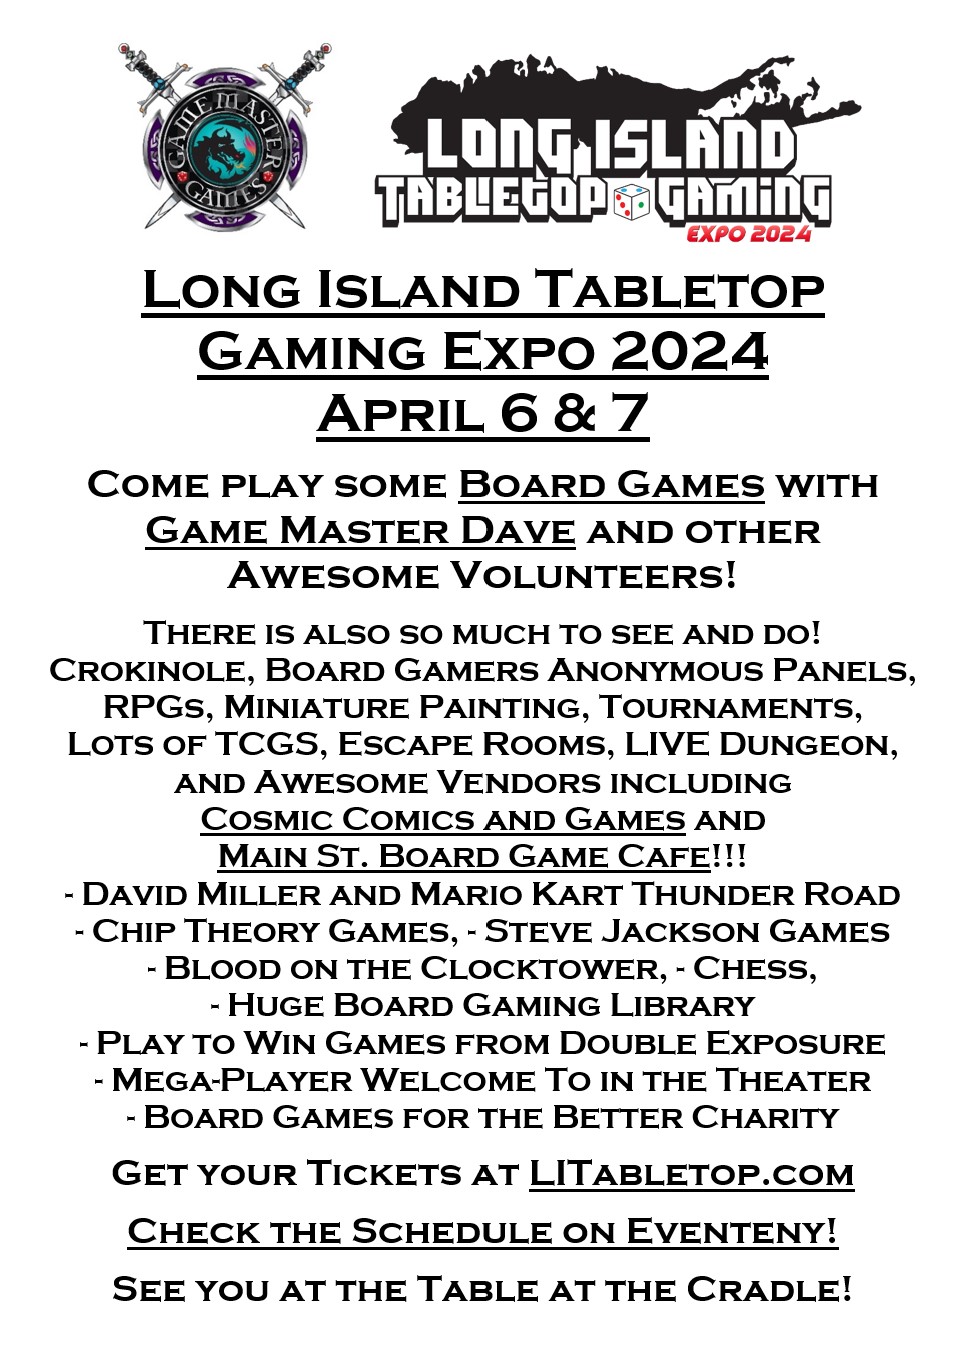 Have fun and make some new friends at the Long Island Tabletop Gaming Expo!